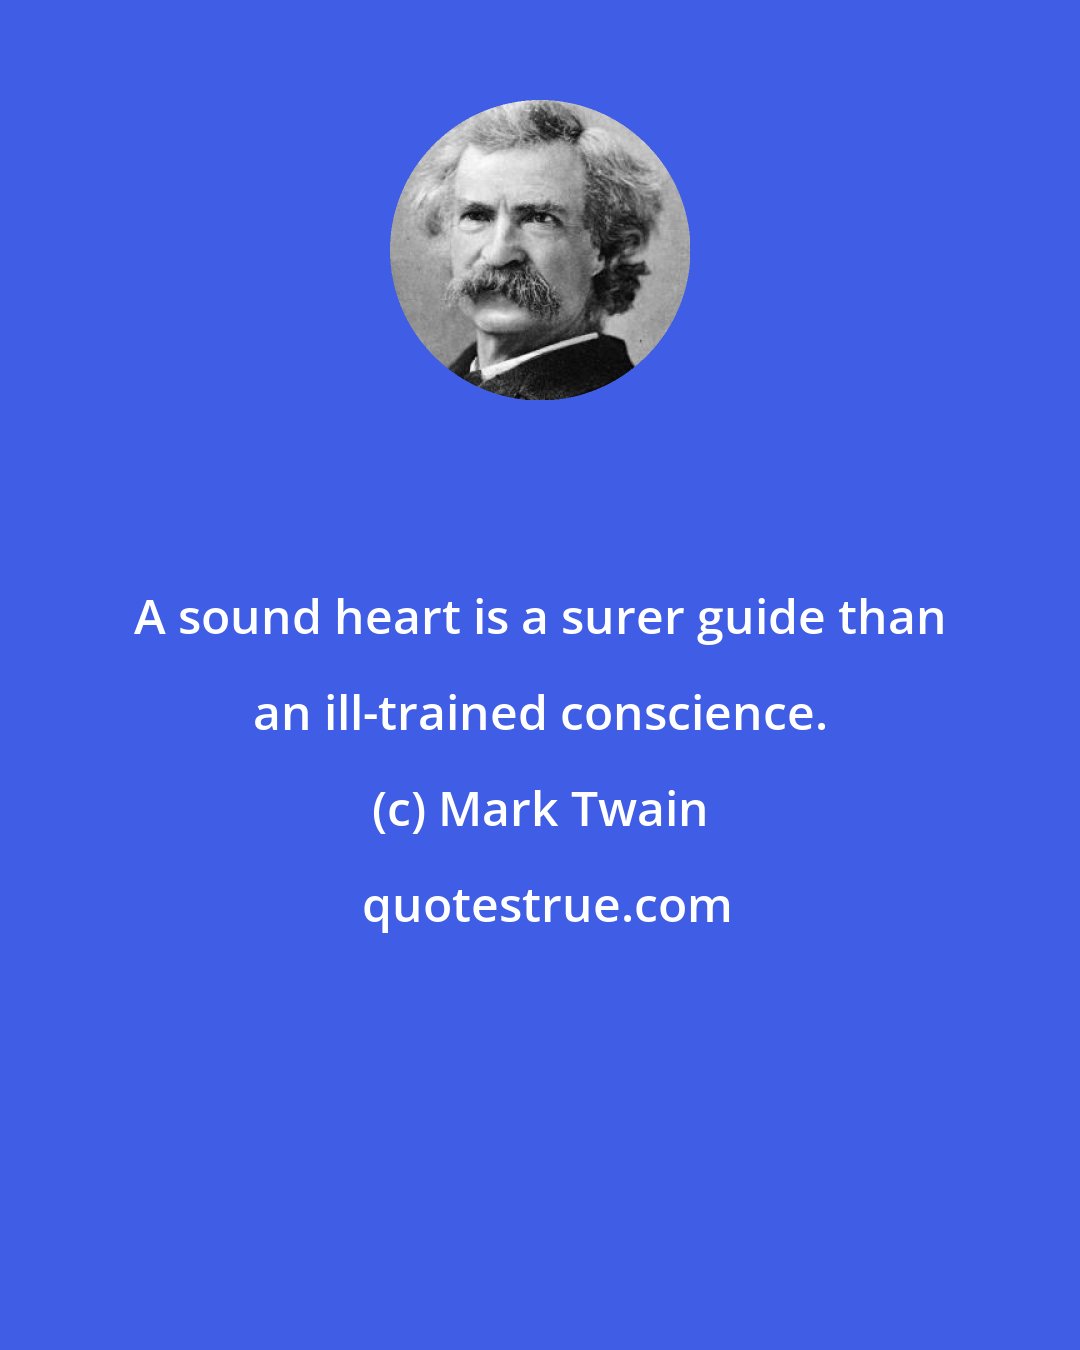 Mark Twain: A sound heart is a surer guide than an ill-trained conscience.